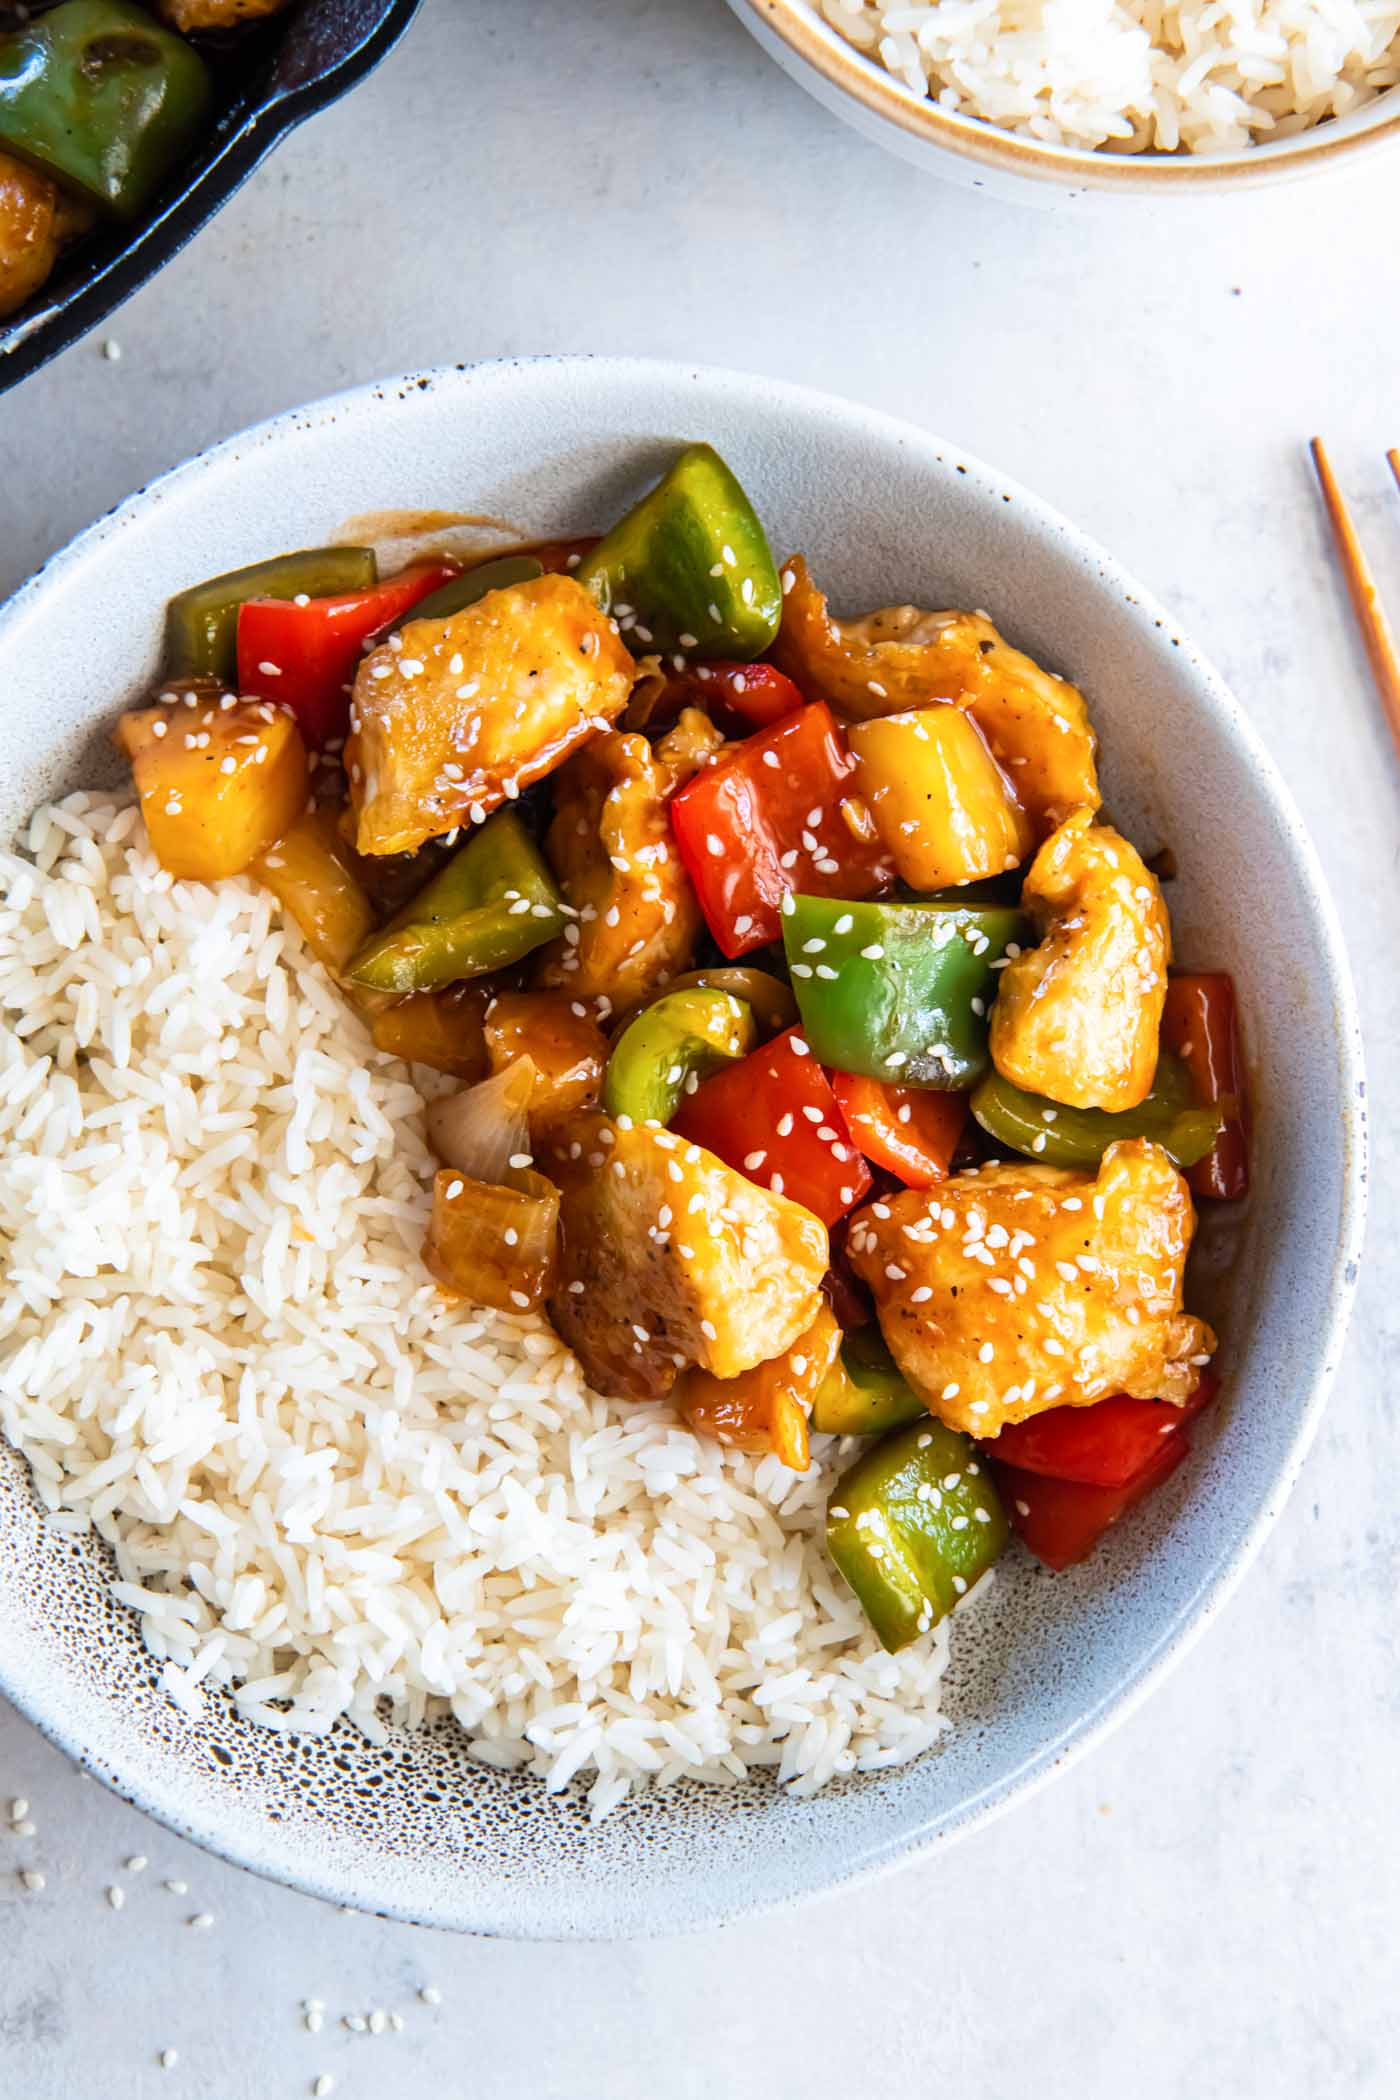 Sweet and sour chicken served in a bowl with white rice.